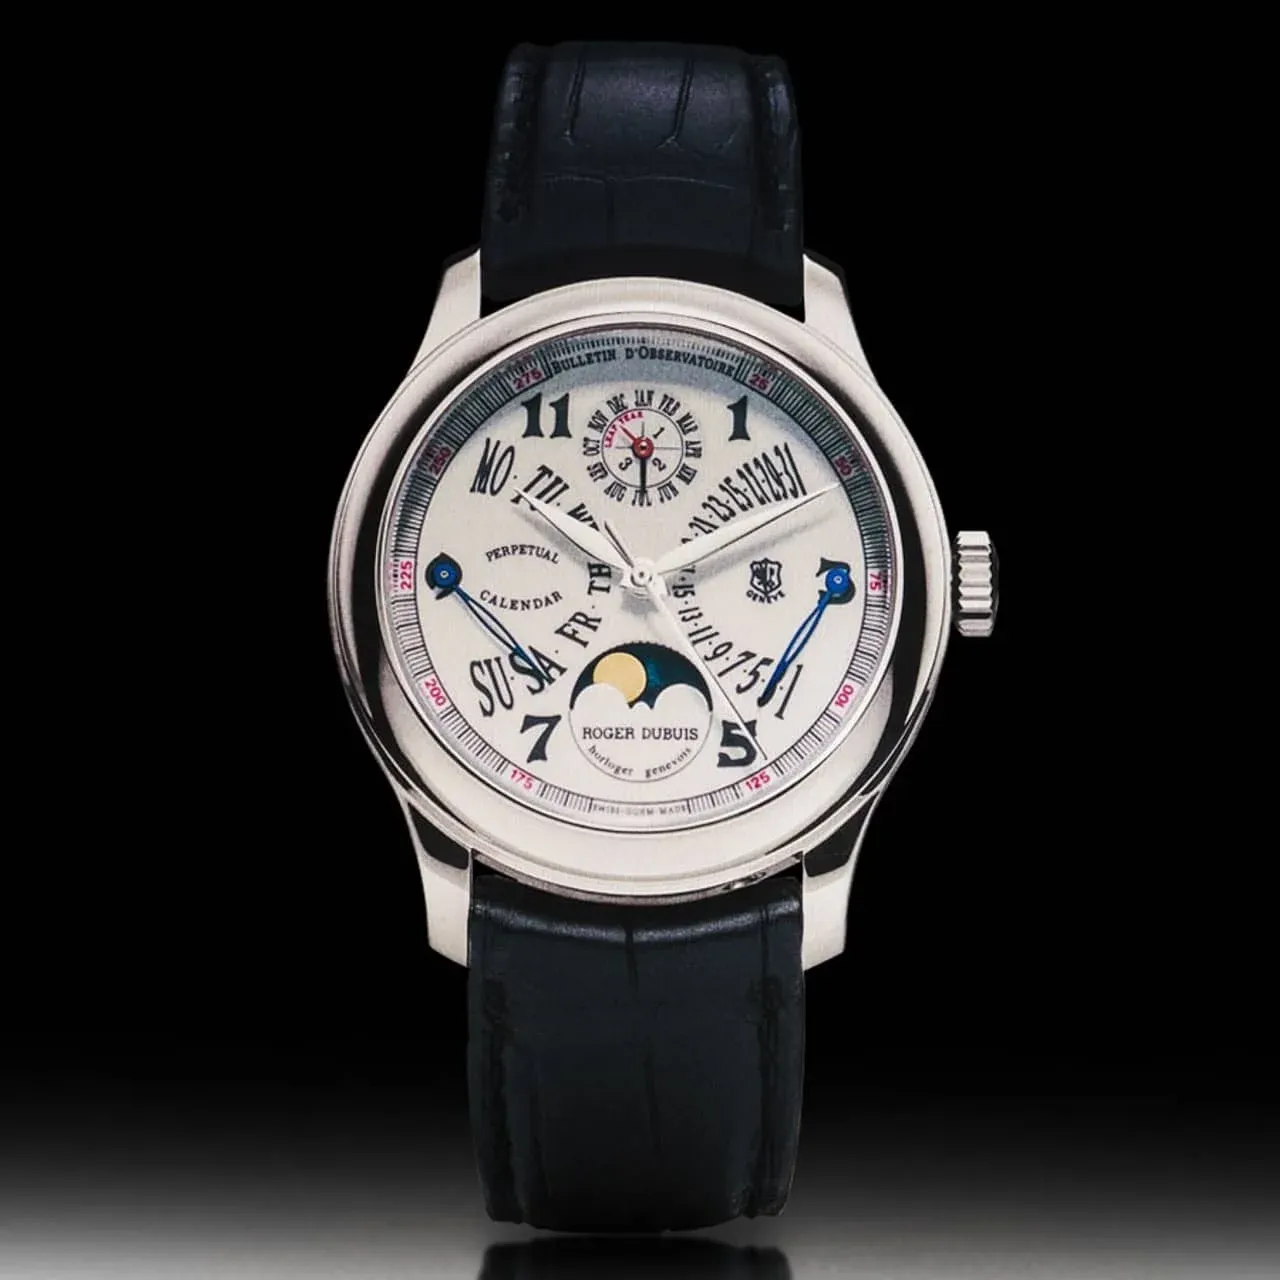 Roger Dubuis first collection 1995